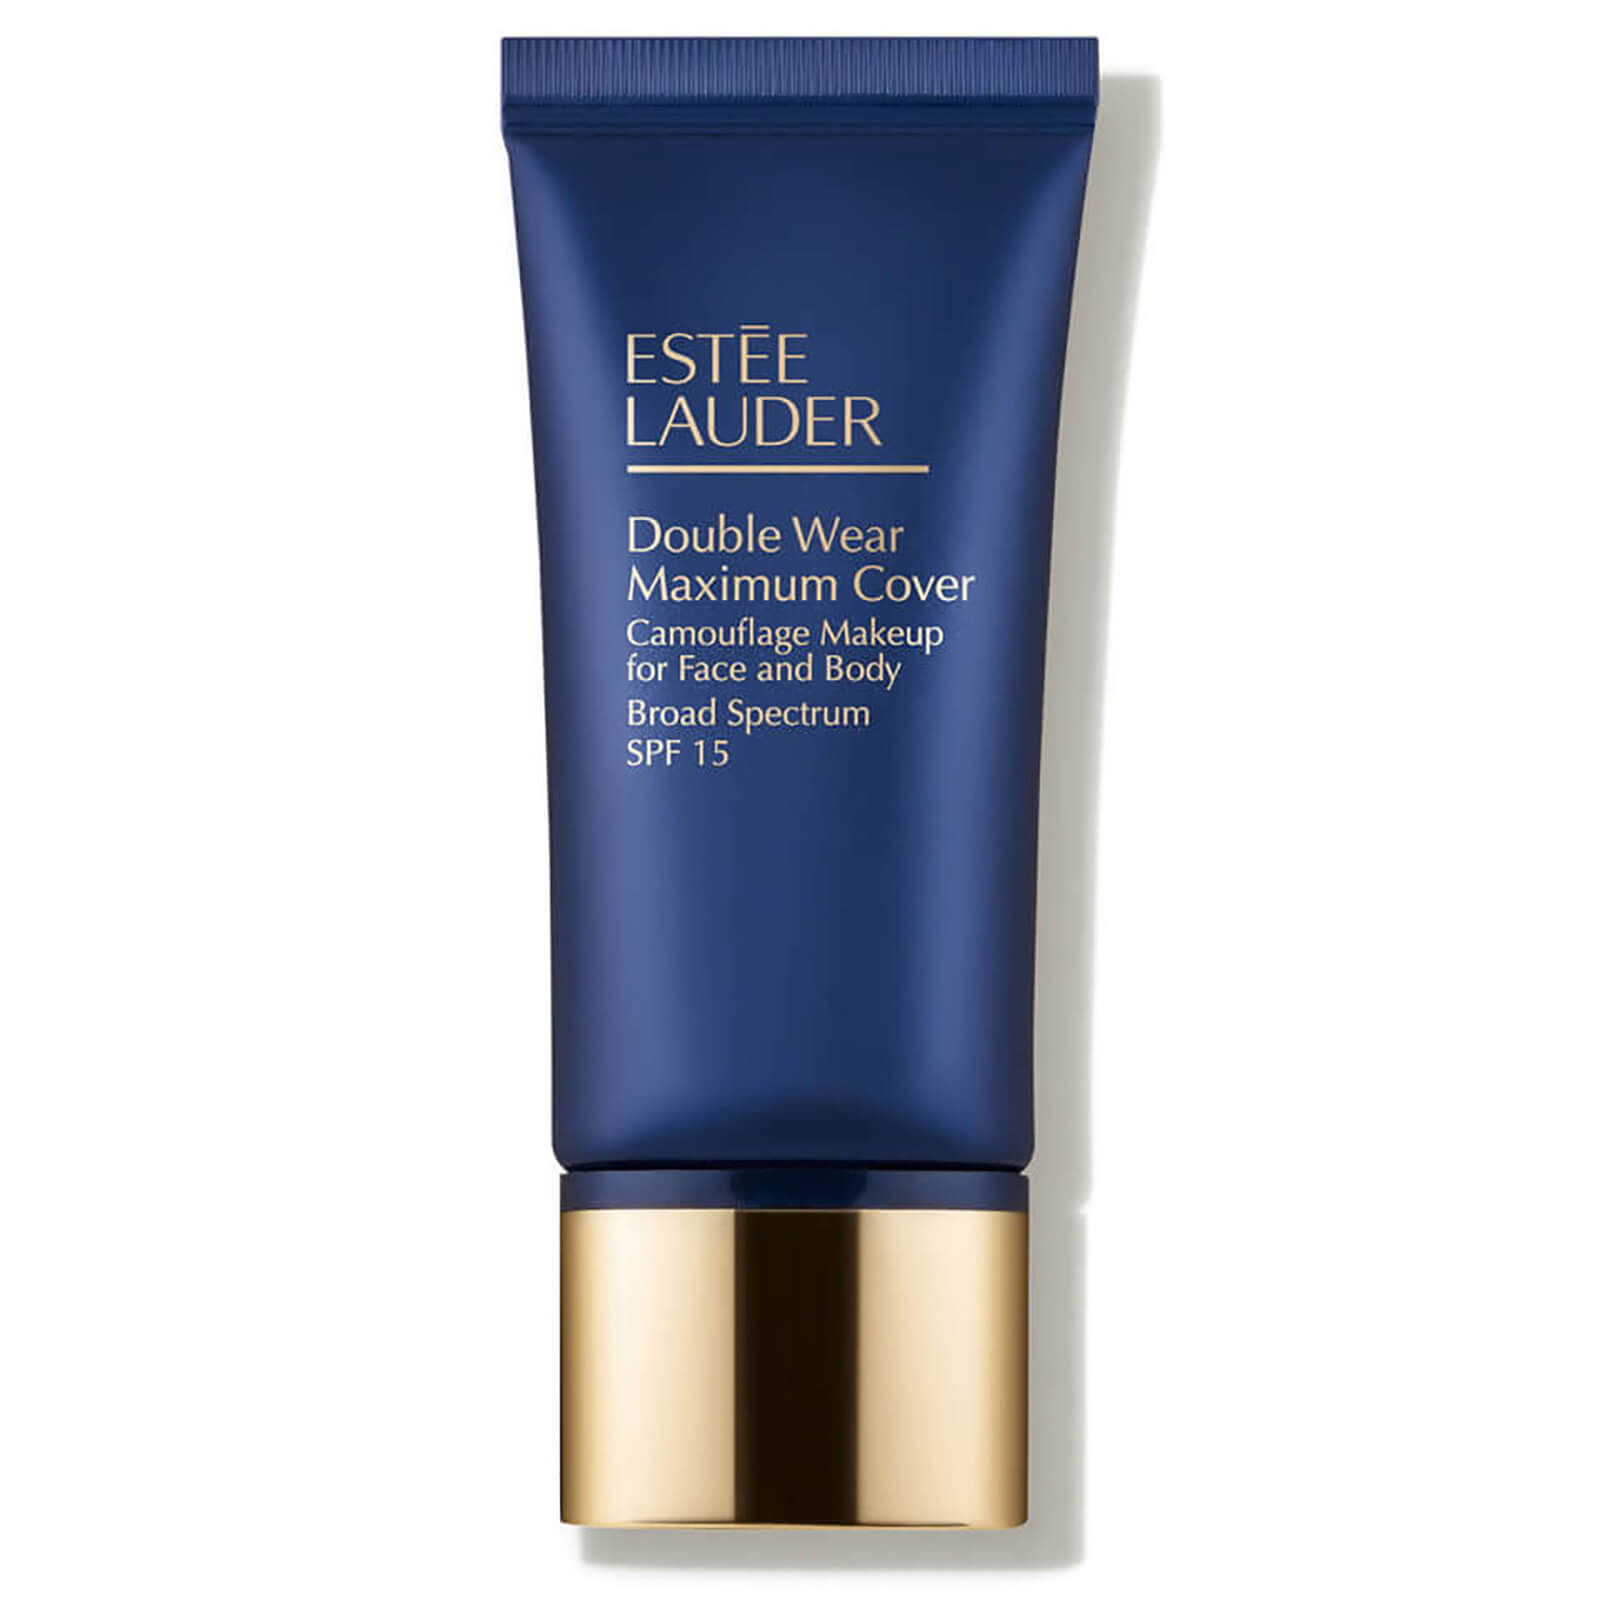 Estee Lauder Double Wear Maximum Cover Camouflage Makeup for Face and Body SPF15 30ml - 4N2 Spiced S